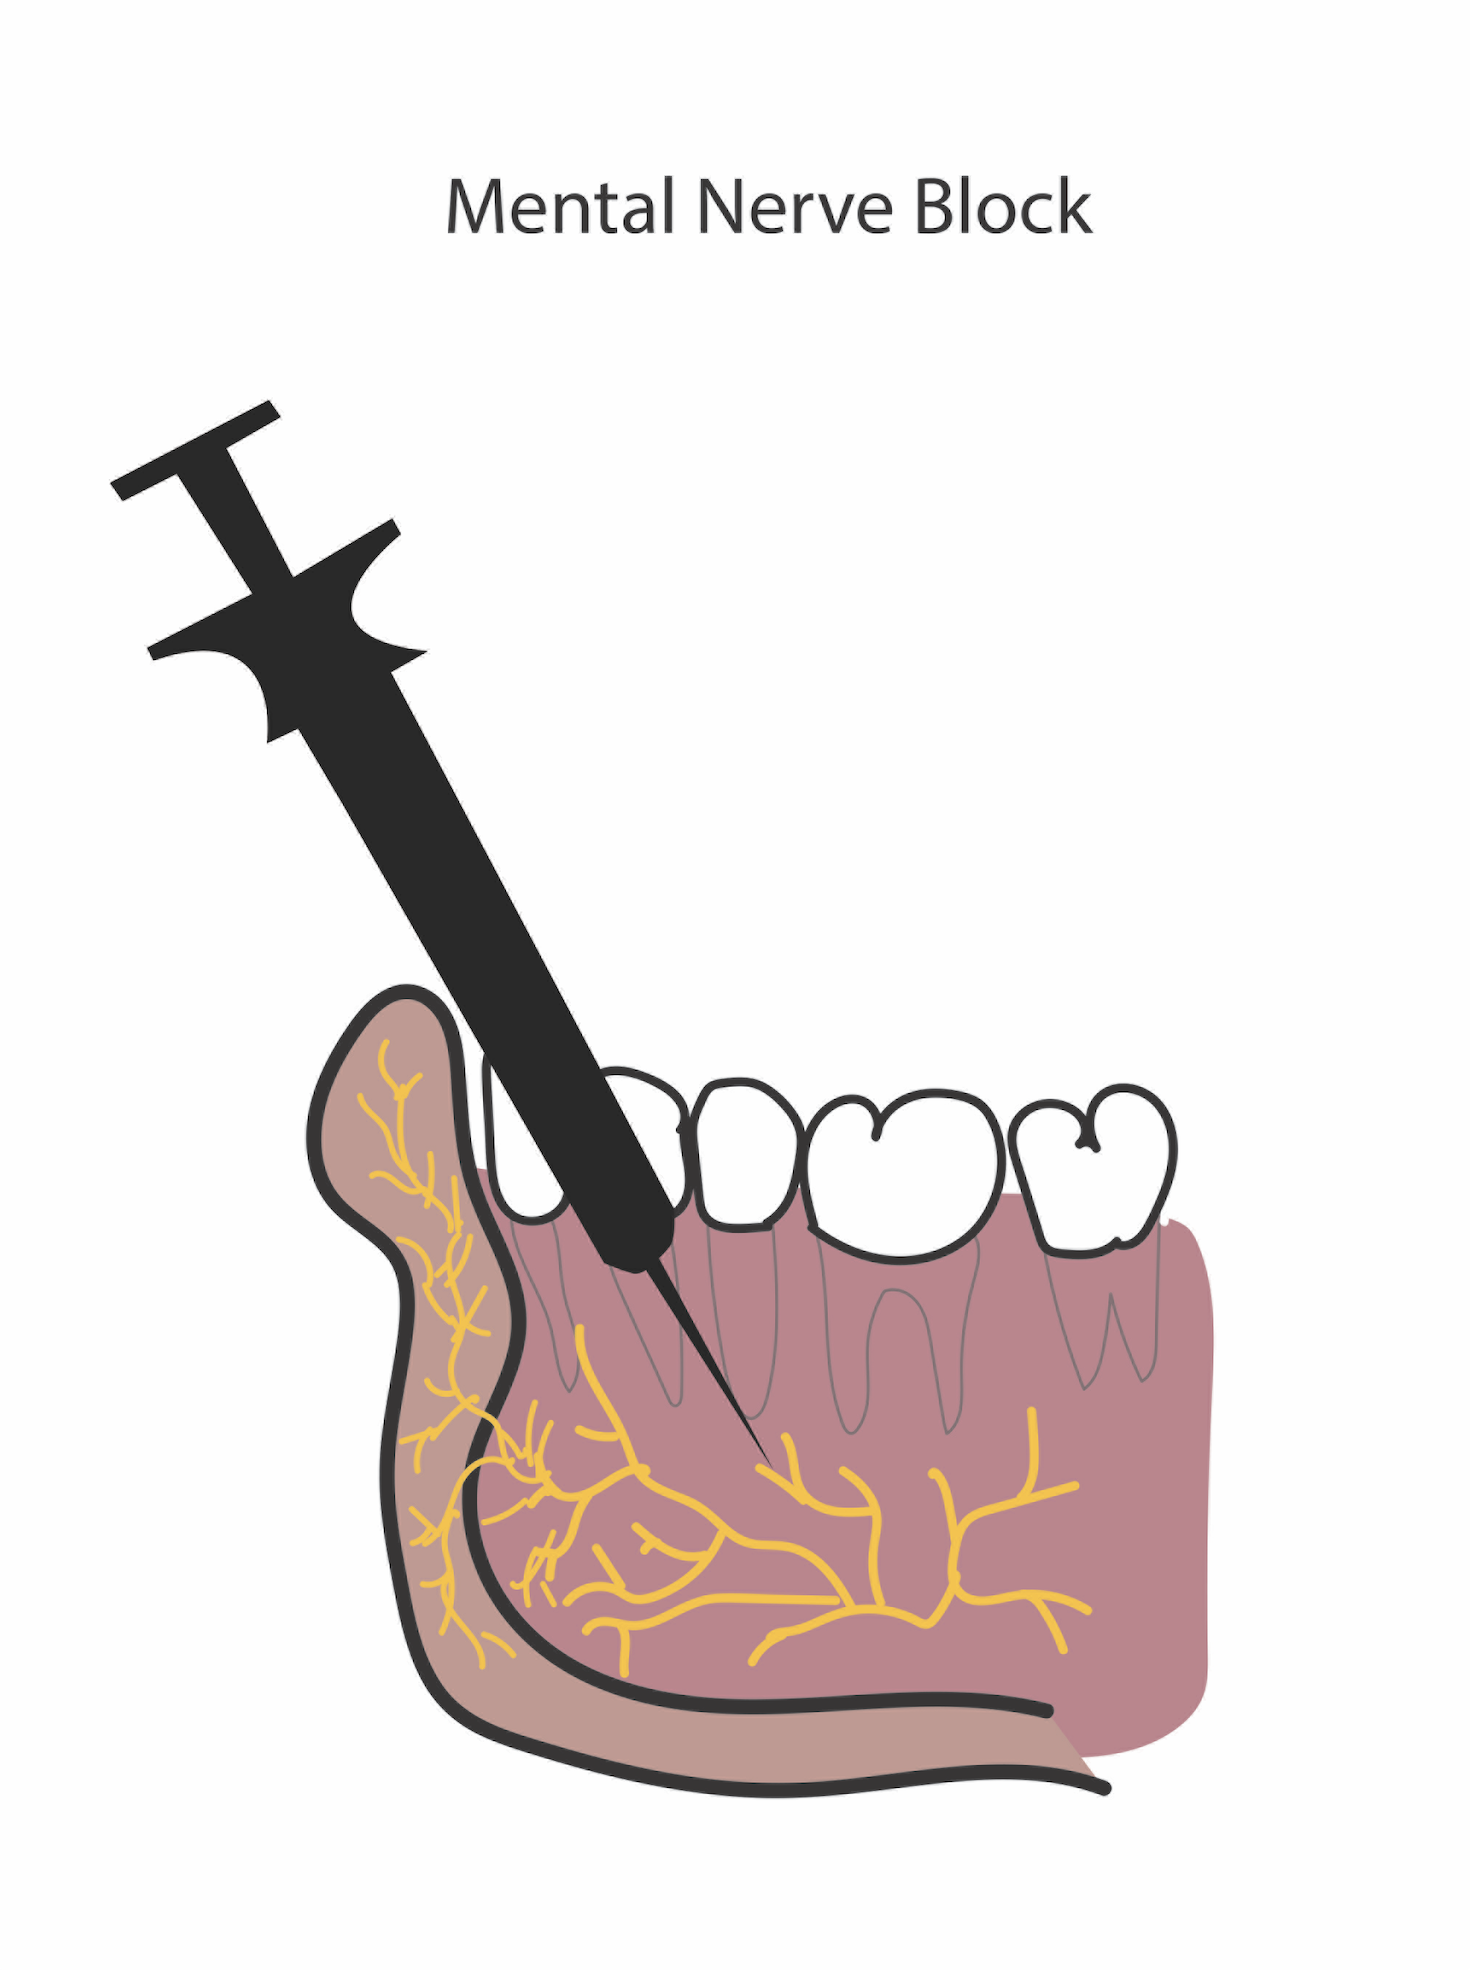 <p>Administration of a Mental Nerve Block. This is a diagram showing the administration of a mental nerve block.</p>